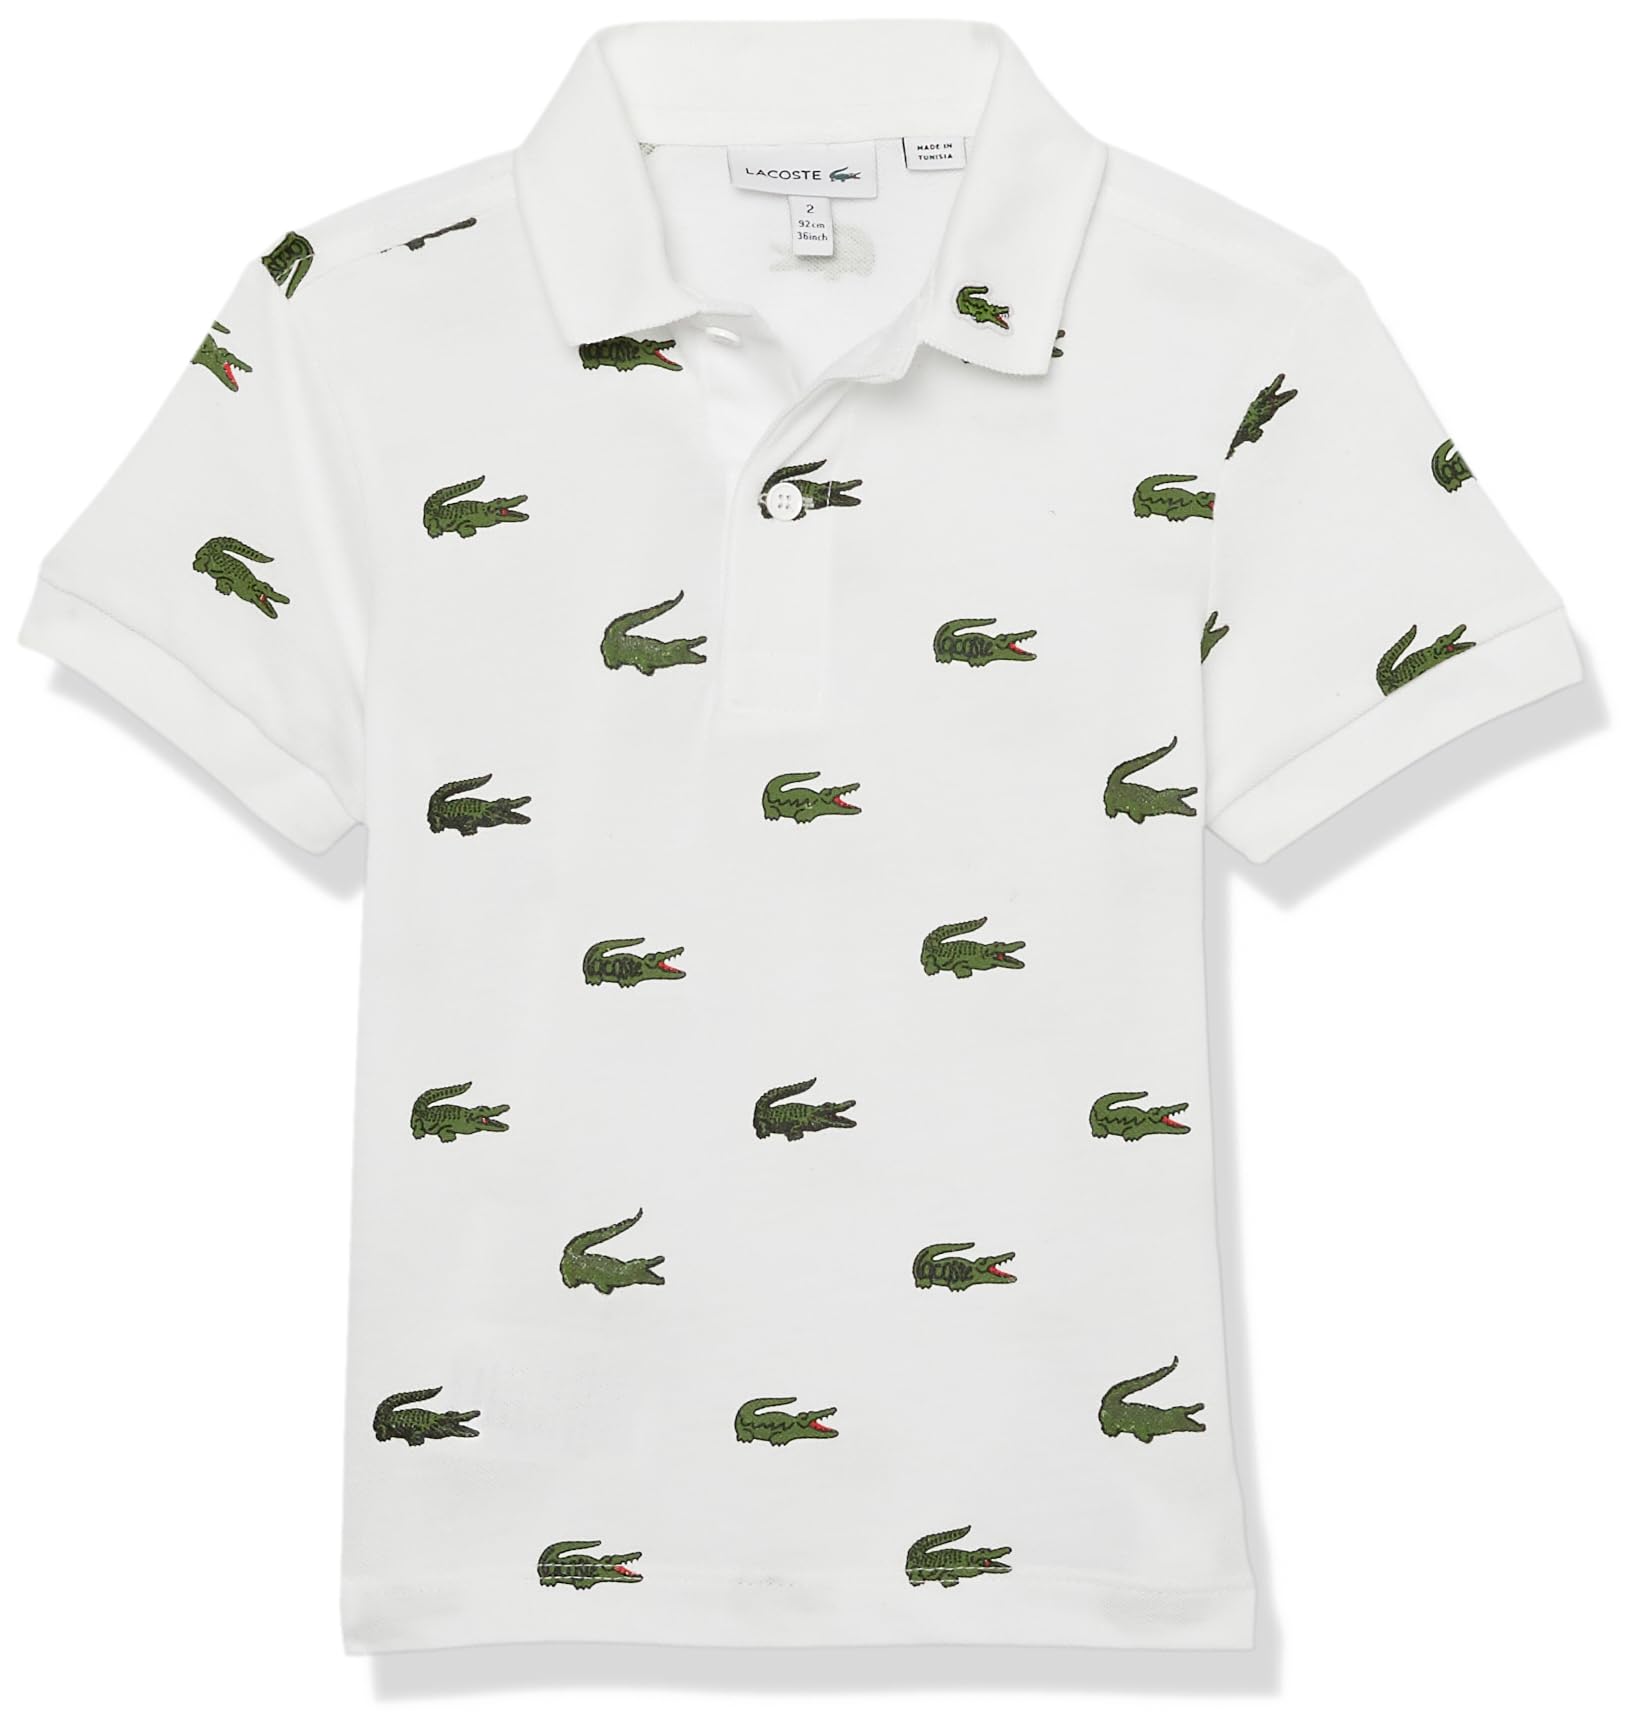 Lacoste Allover Croc Print Polo, Blanc, 12 Months